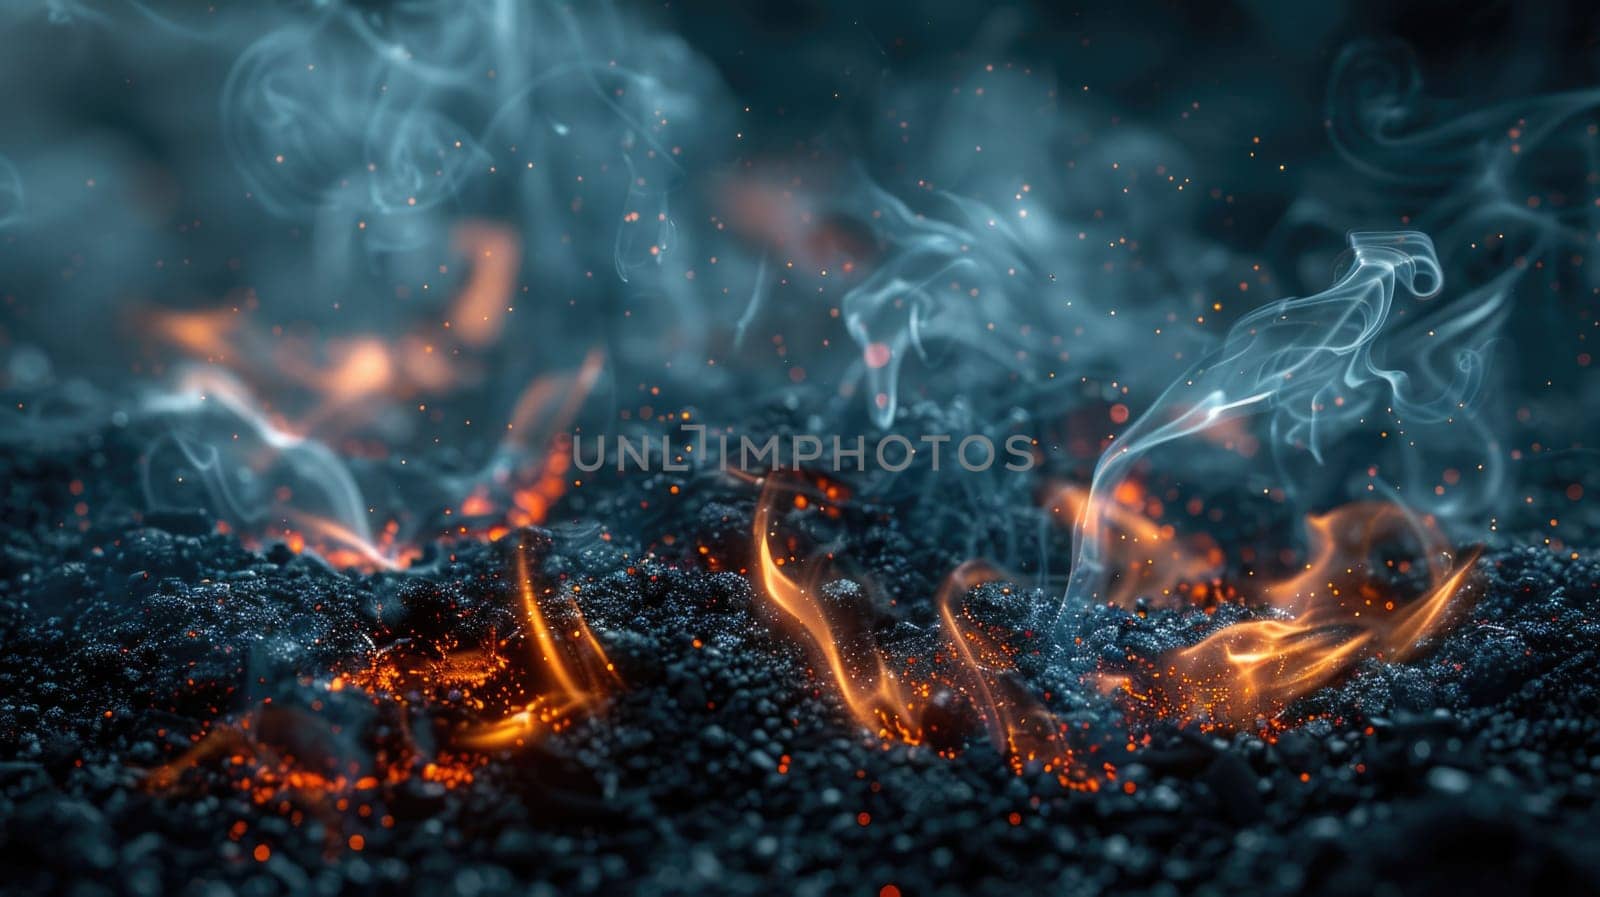 A detailed view of flickering flames and billowing smoke against a black backdrop.